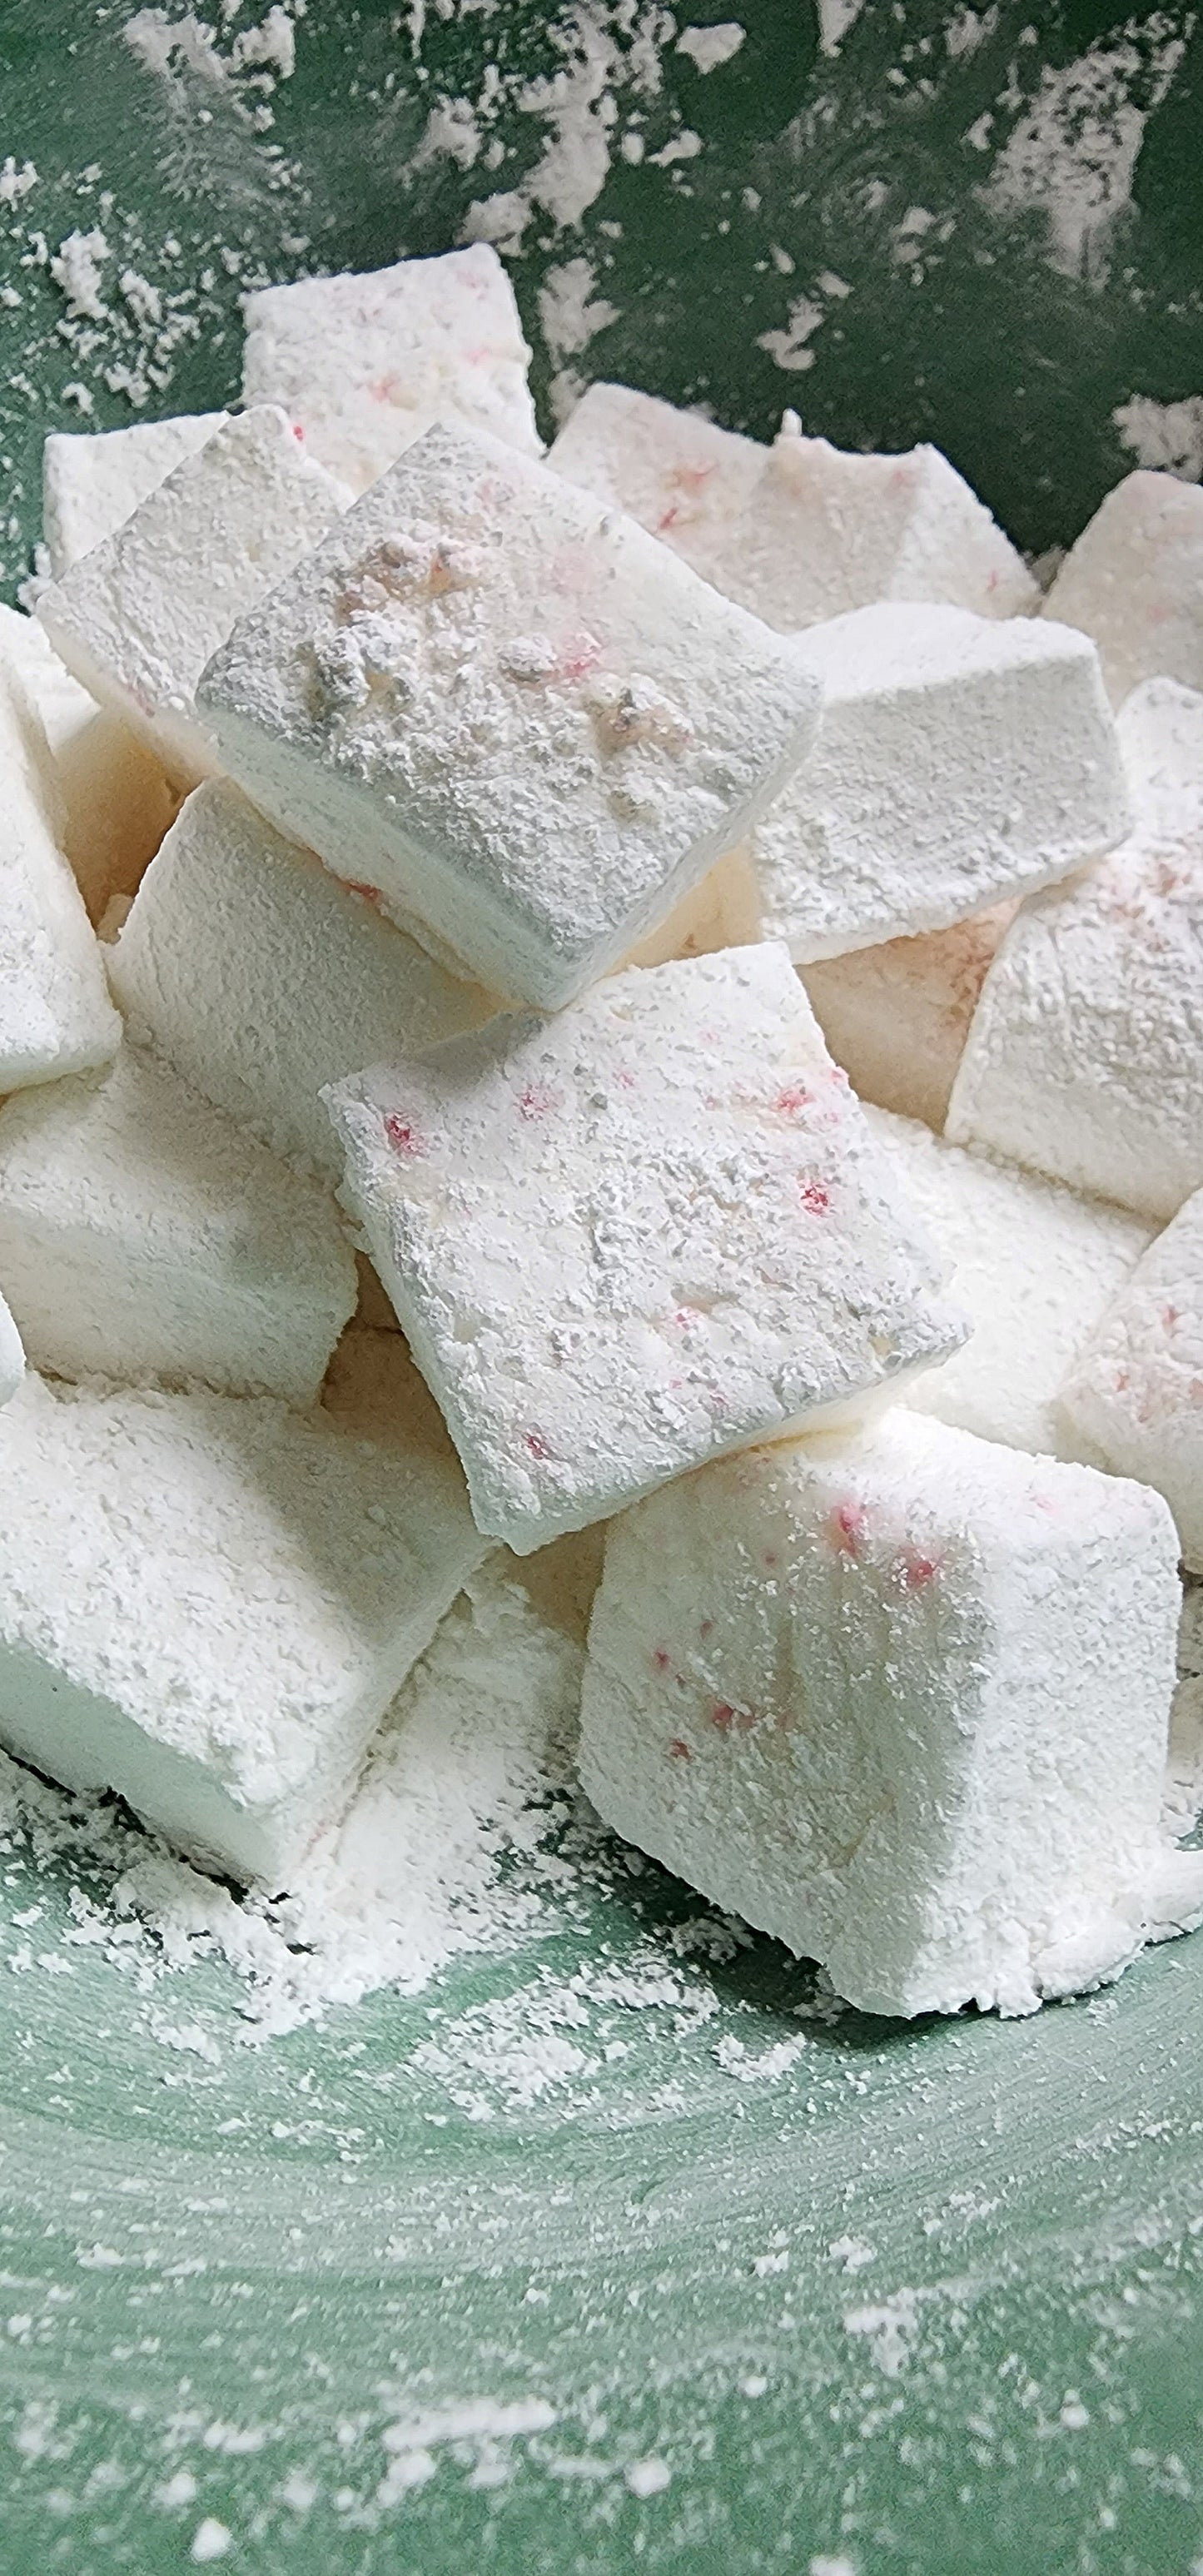 Candy Cane Marshmallow (#1 CHRISTMAS)